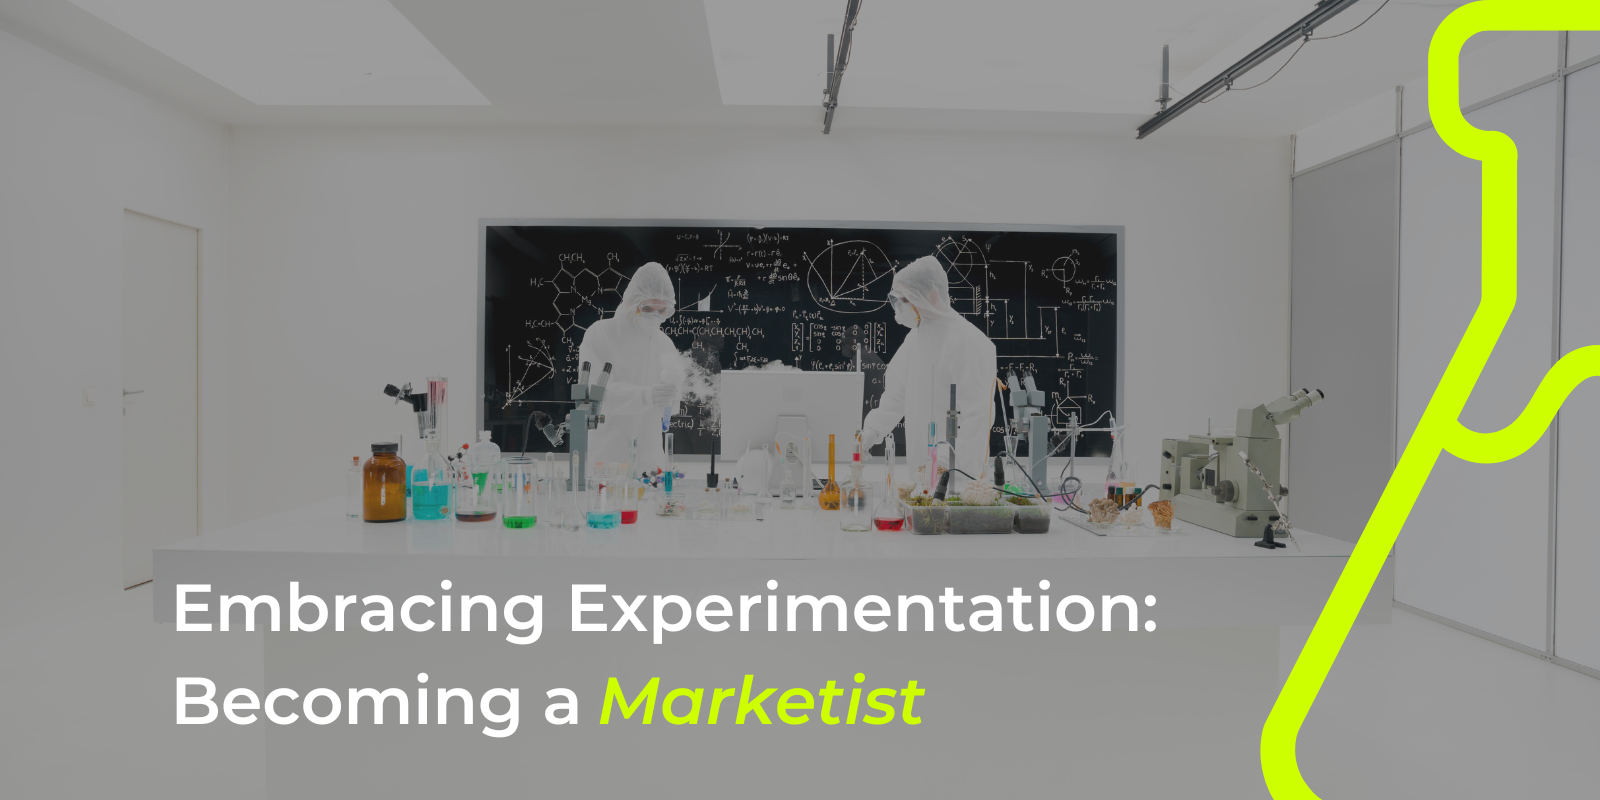 Embracing Experimentation: Becoming a Marketist